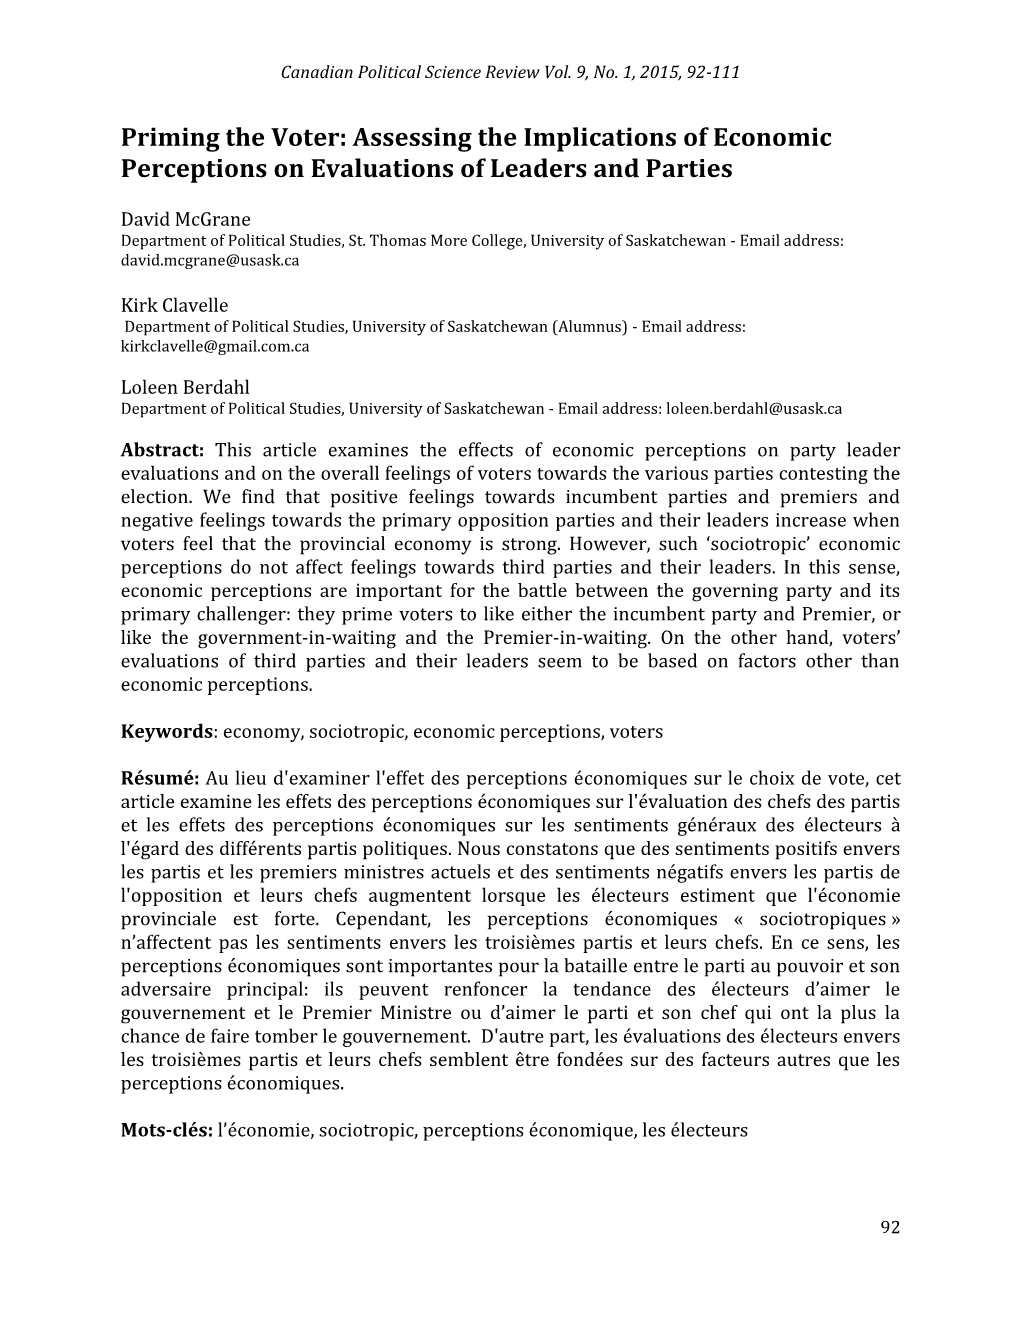 Priming the Voter: Assessing the Implications of Economic Perceptions on Evaluations of Leaders and Parties